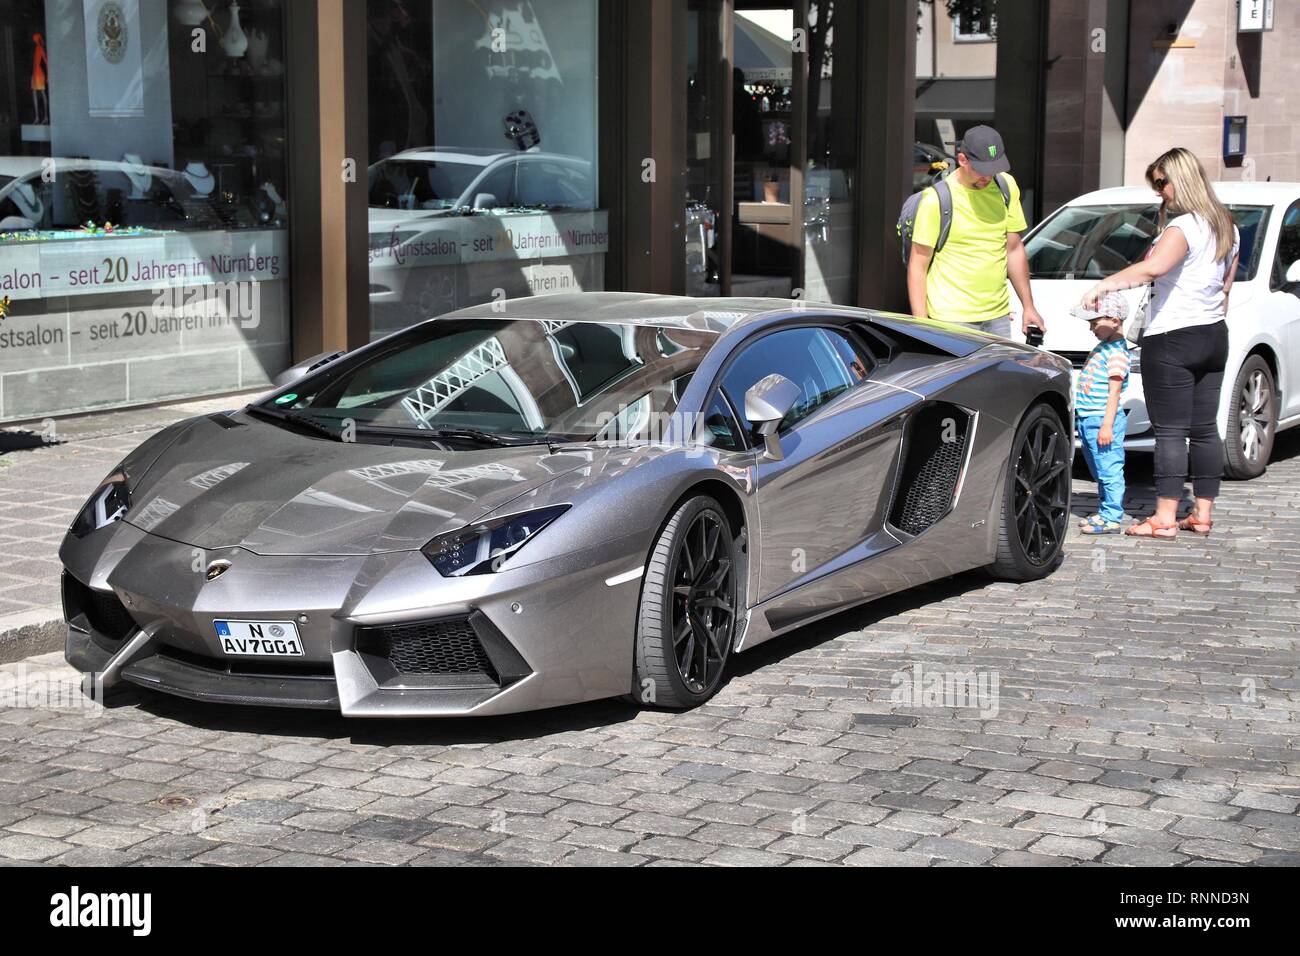 NUREMBERG, GERMANY - MAY 6, 2018: People admire Lamborghini Aventador luxury sports car parked in Germany. The car was designed by Filippo Perini. Stock Photo